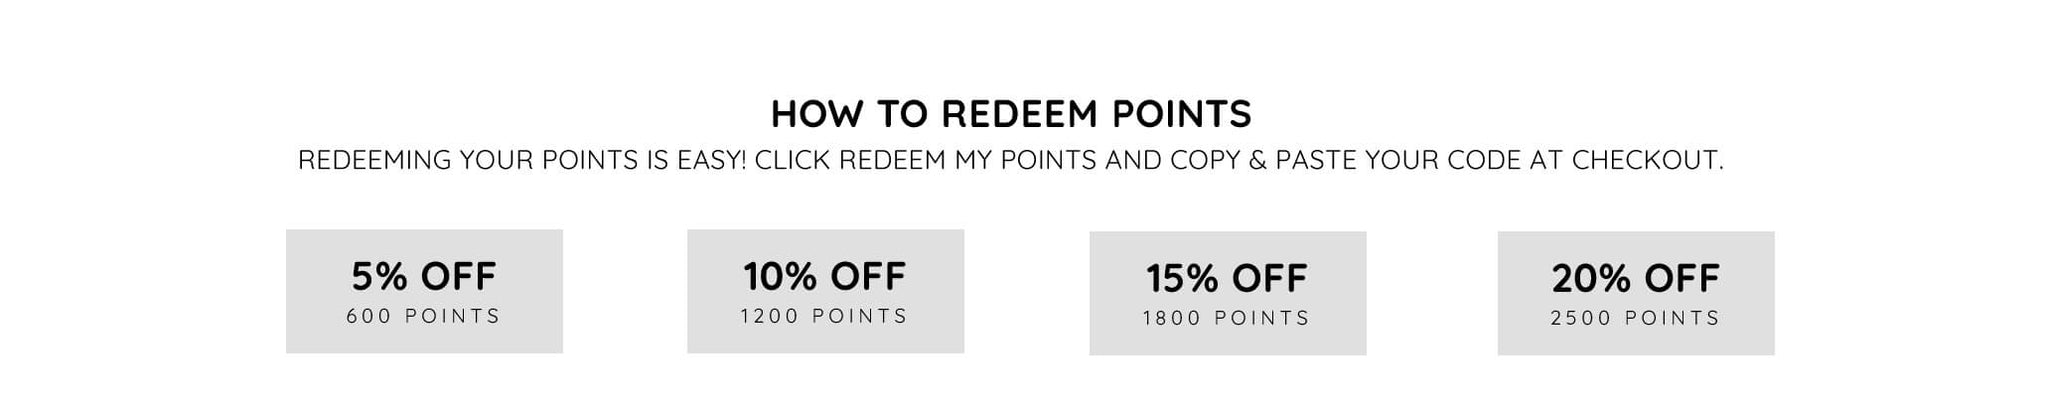 How to redeem your points - Win free yarn with Max and Herb Reward Circle Program